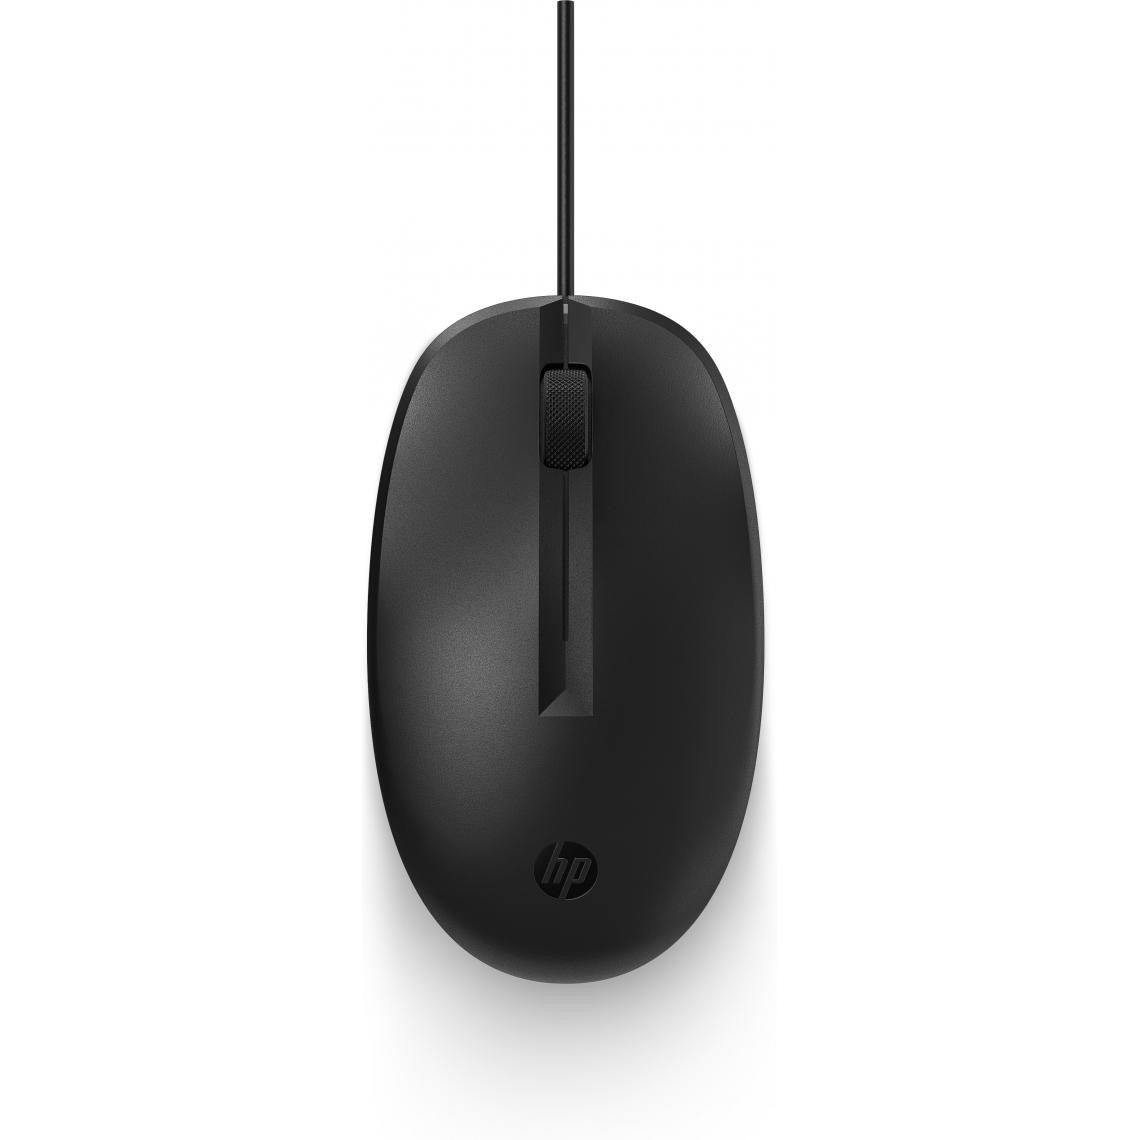 Hp - HP 128 Laser Wired Mouse souris Ambidextre USB Type-A 1200 DPI - Souris